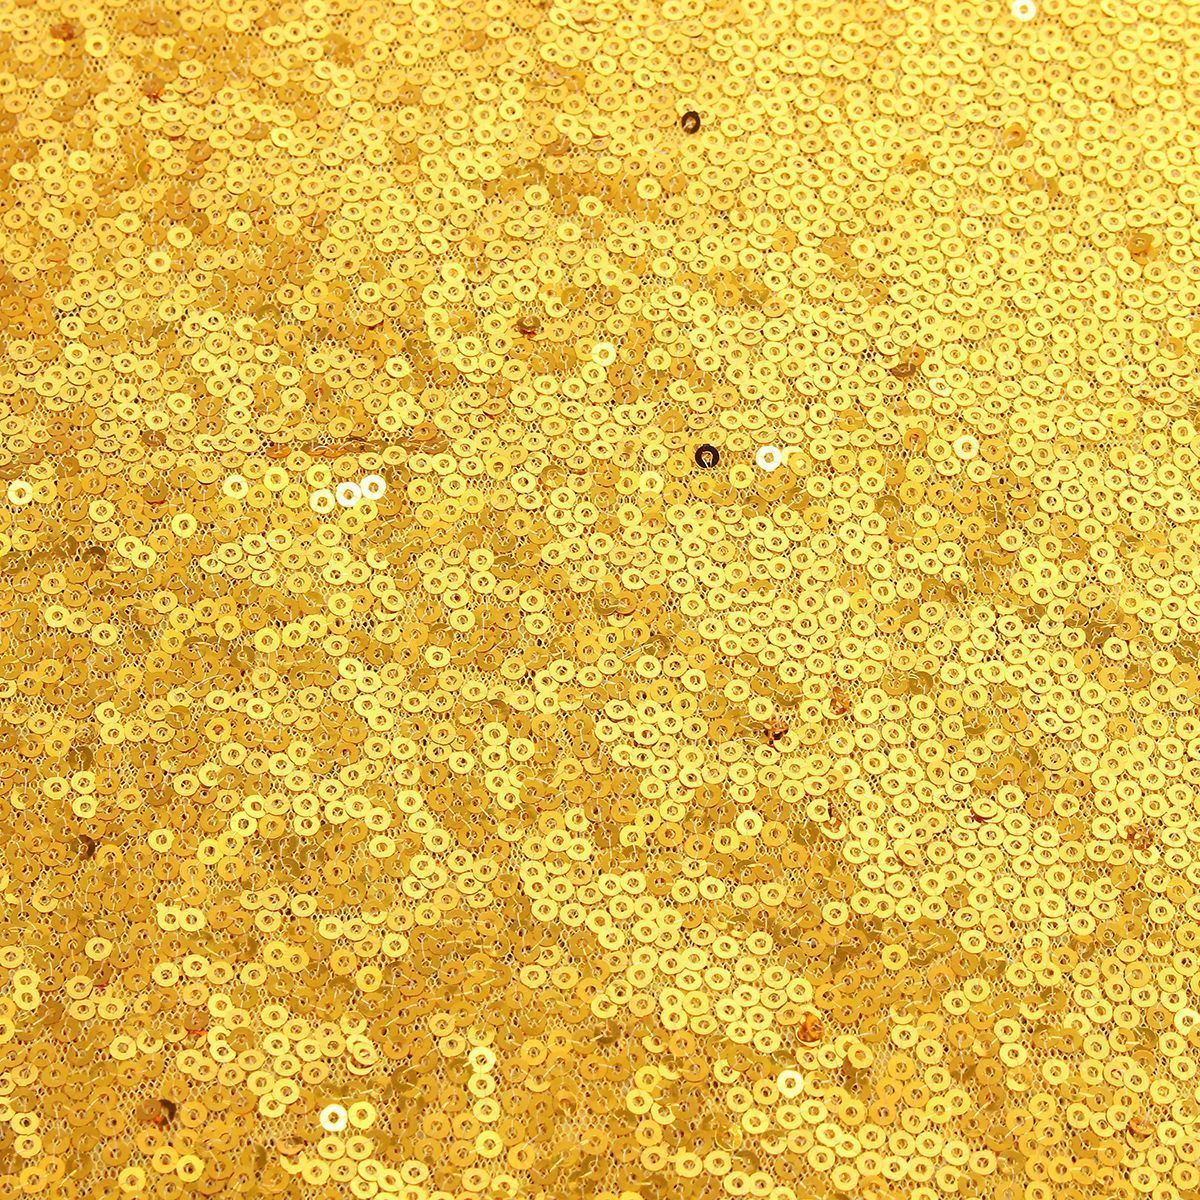 3X5FT-Gold-Sequin-Photo-Backdrop-Wedding-Photo-Booth-Photography-Background-1126466